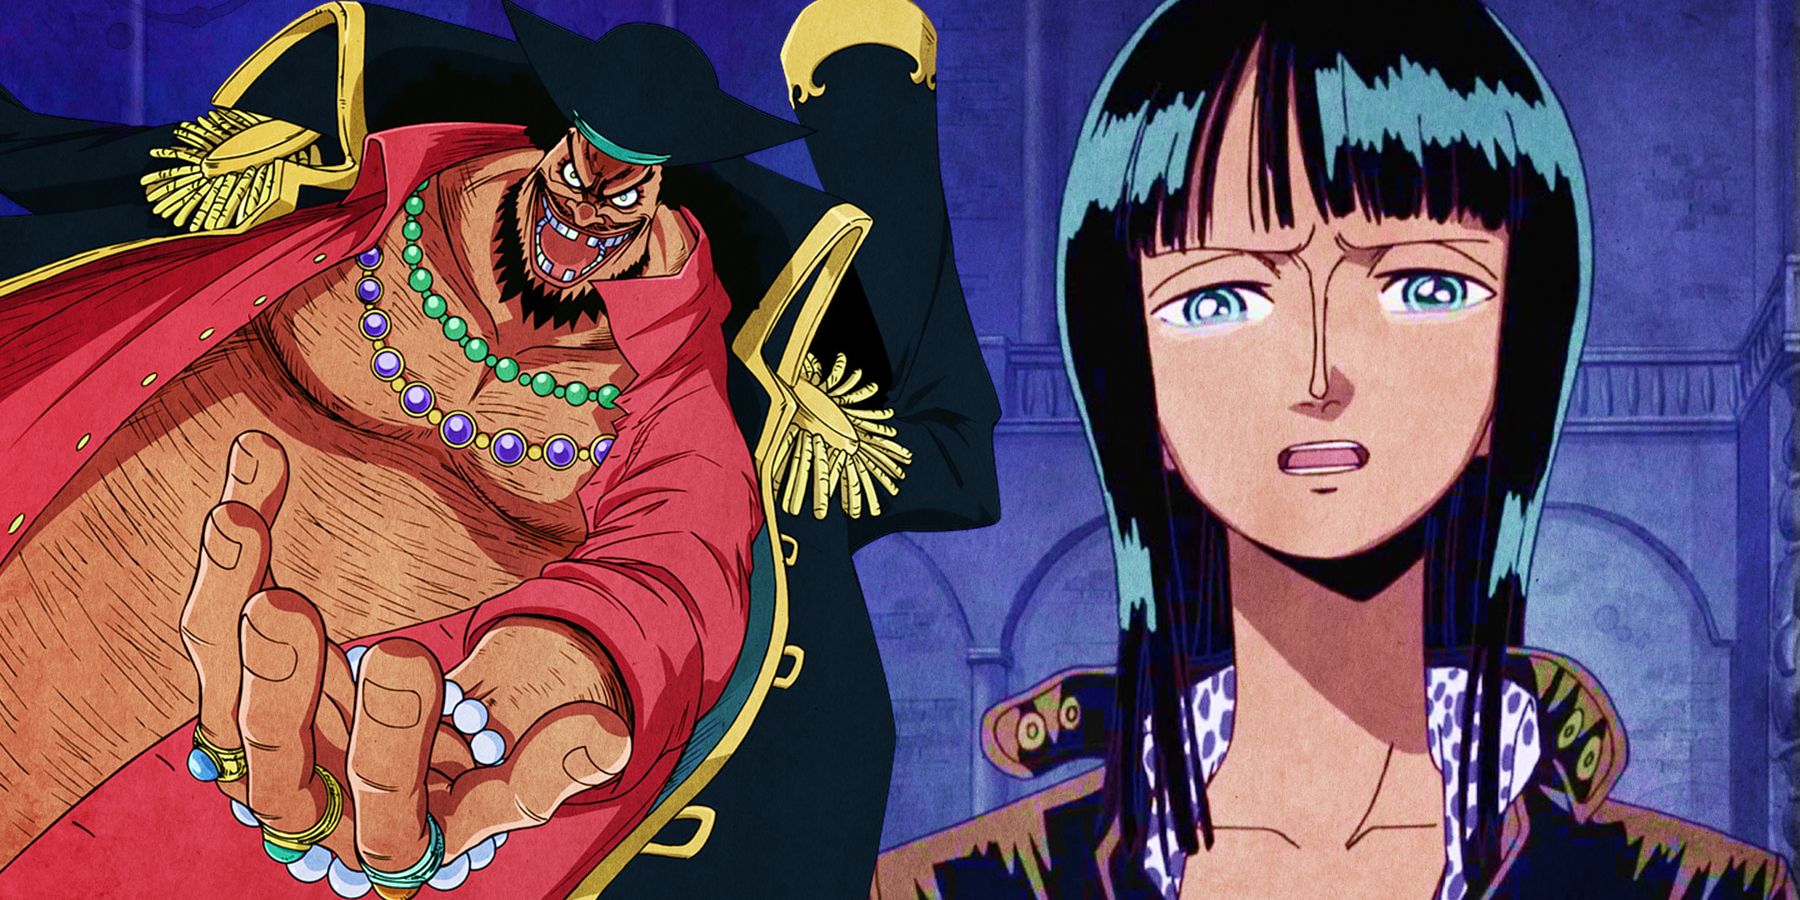 On the left, Blackbeard grins and reaches out a hand. On the right, Nico Robin begins to tear up.